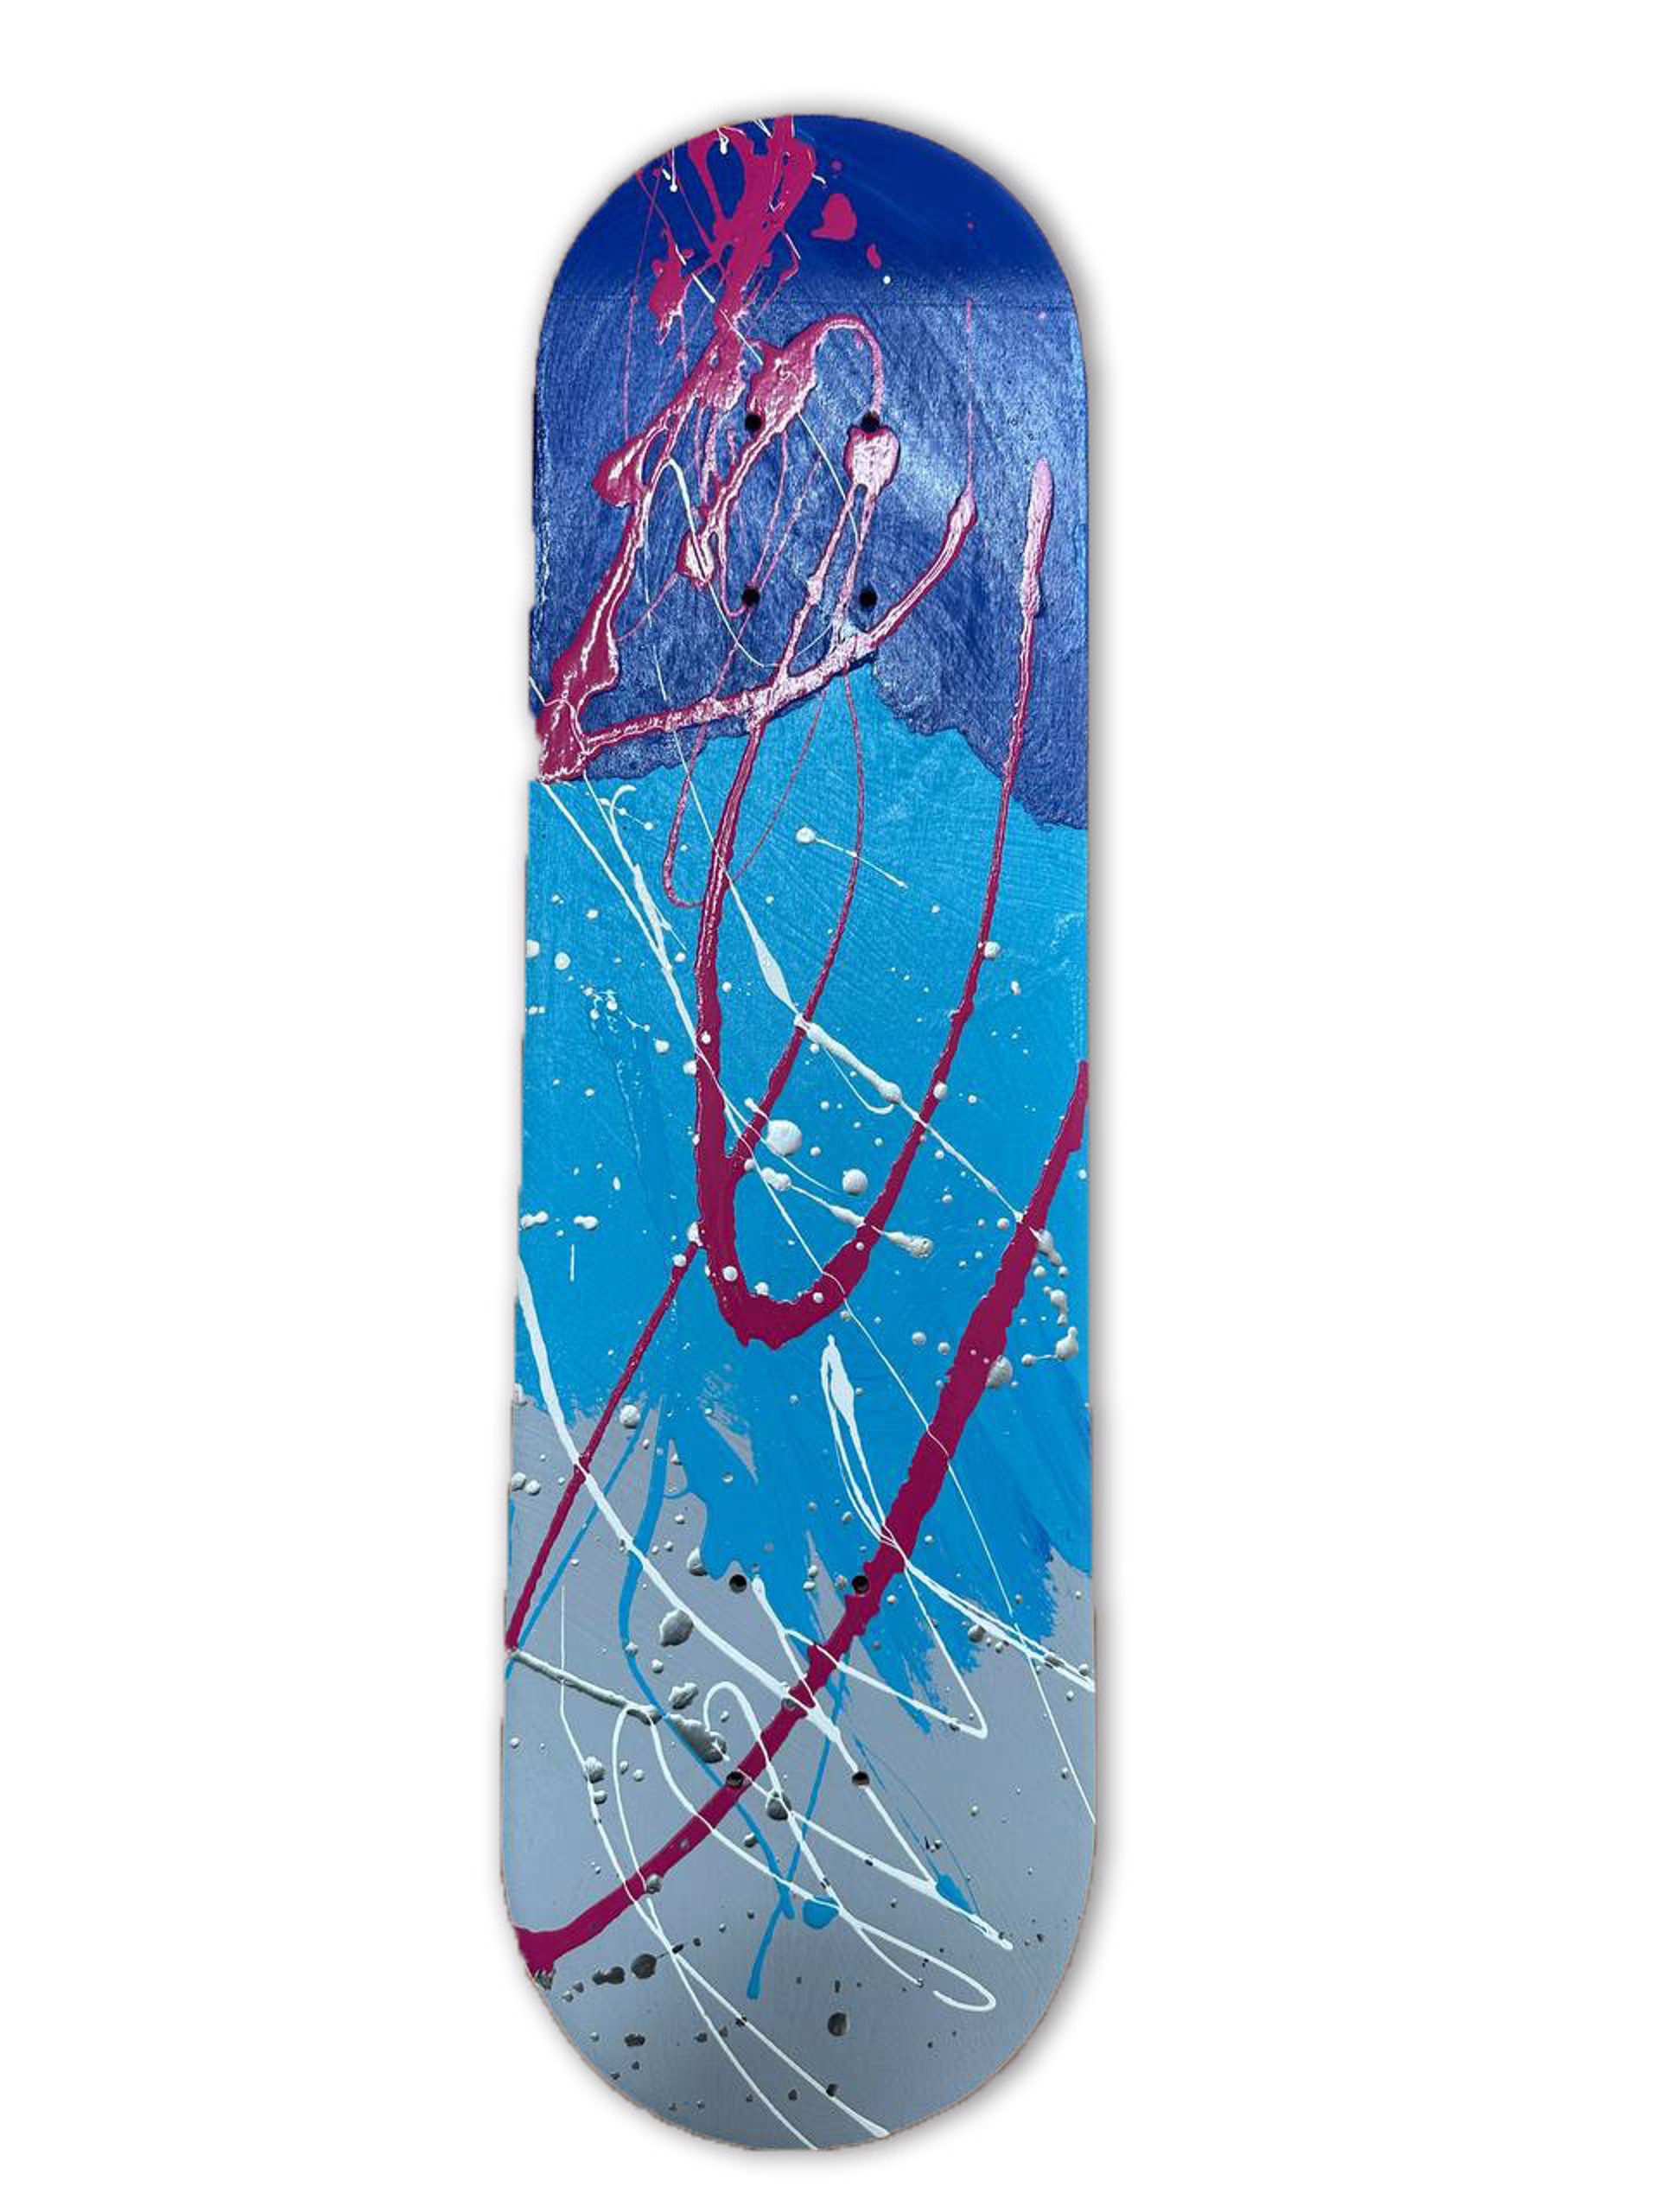 "Abstract Skateboard I (Colorful)" by Abstract Skateboards Wall Sculptures by Elena Bulatova